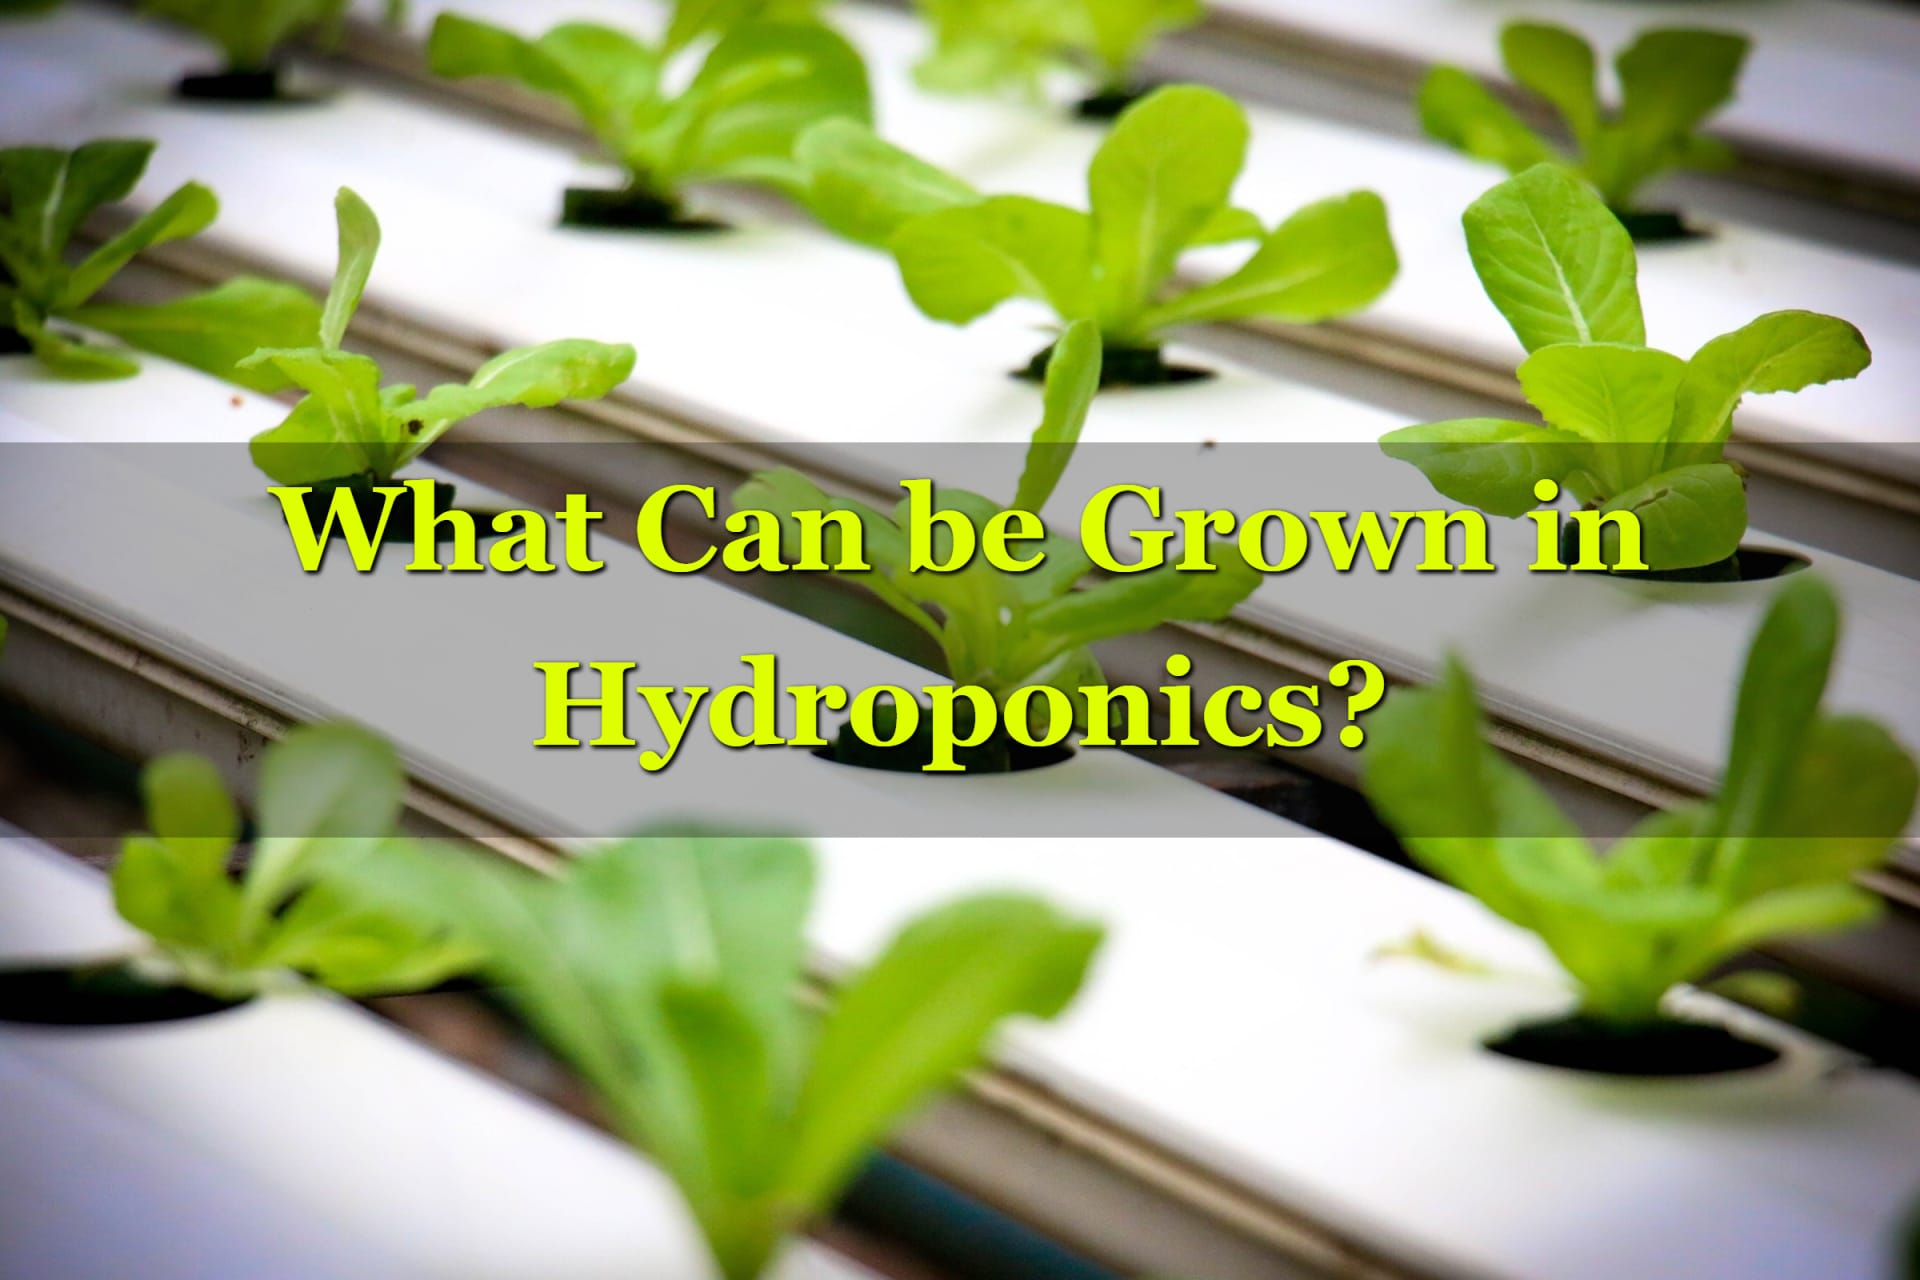 Rows or plants being grown in hydroponics